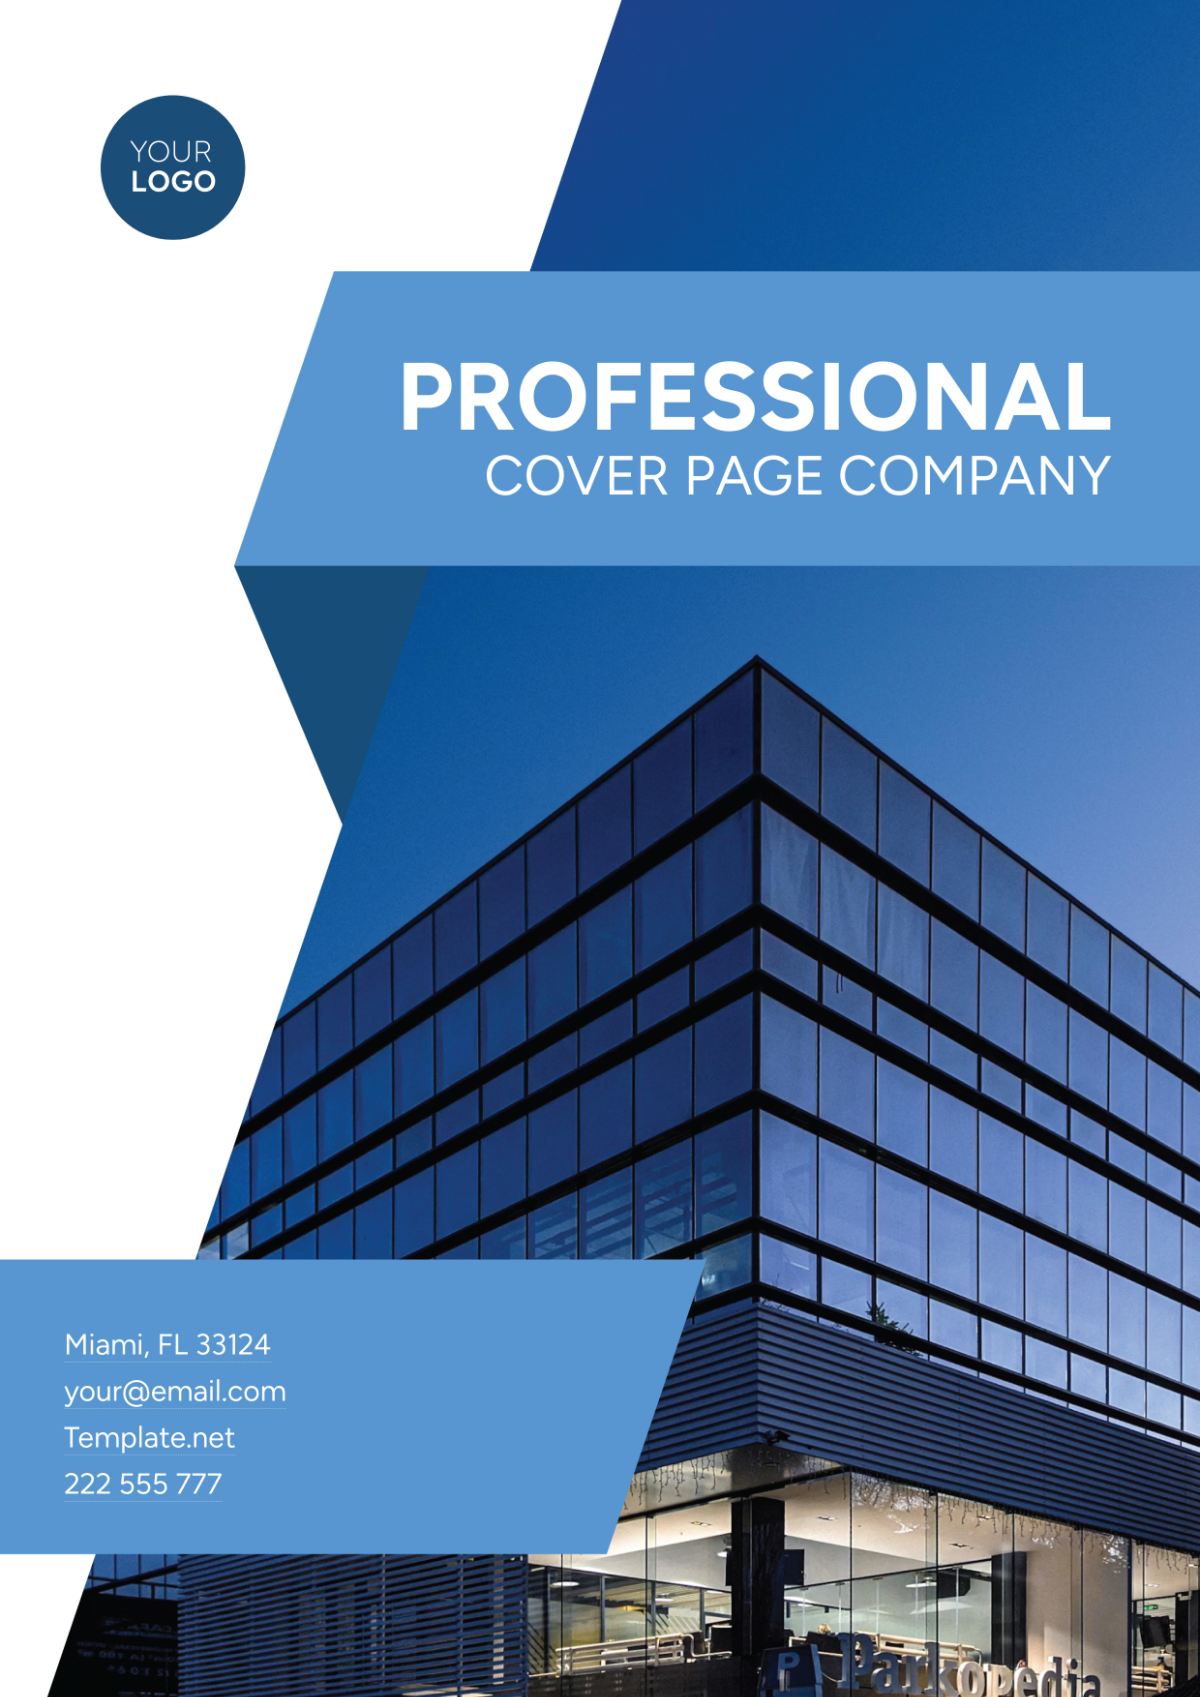 Professional Cover Page Company Template - Edit Online & Download ...